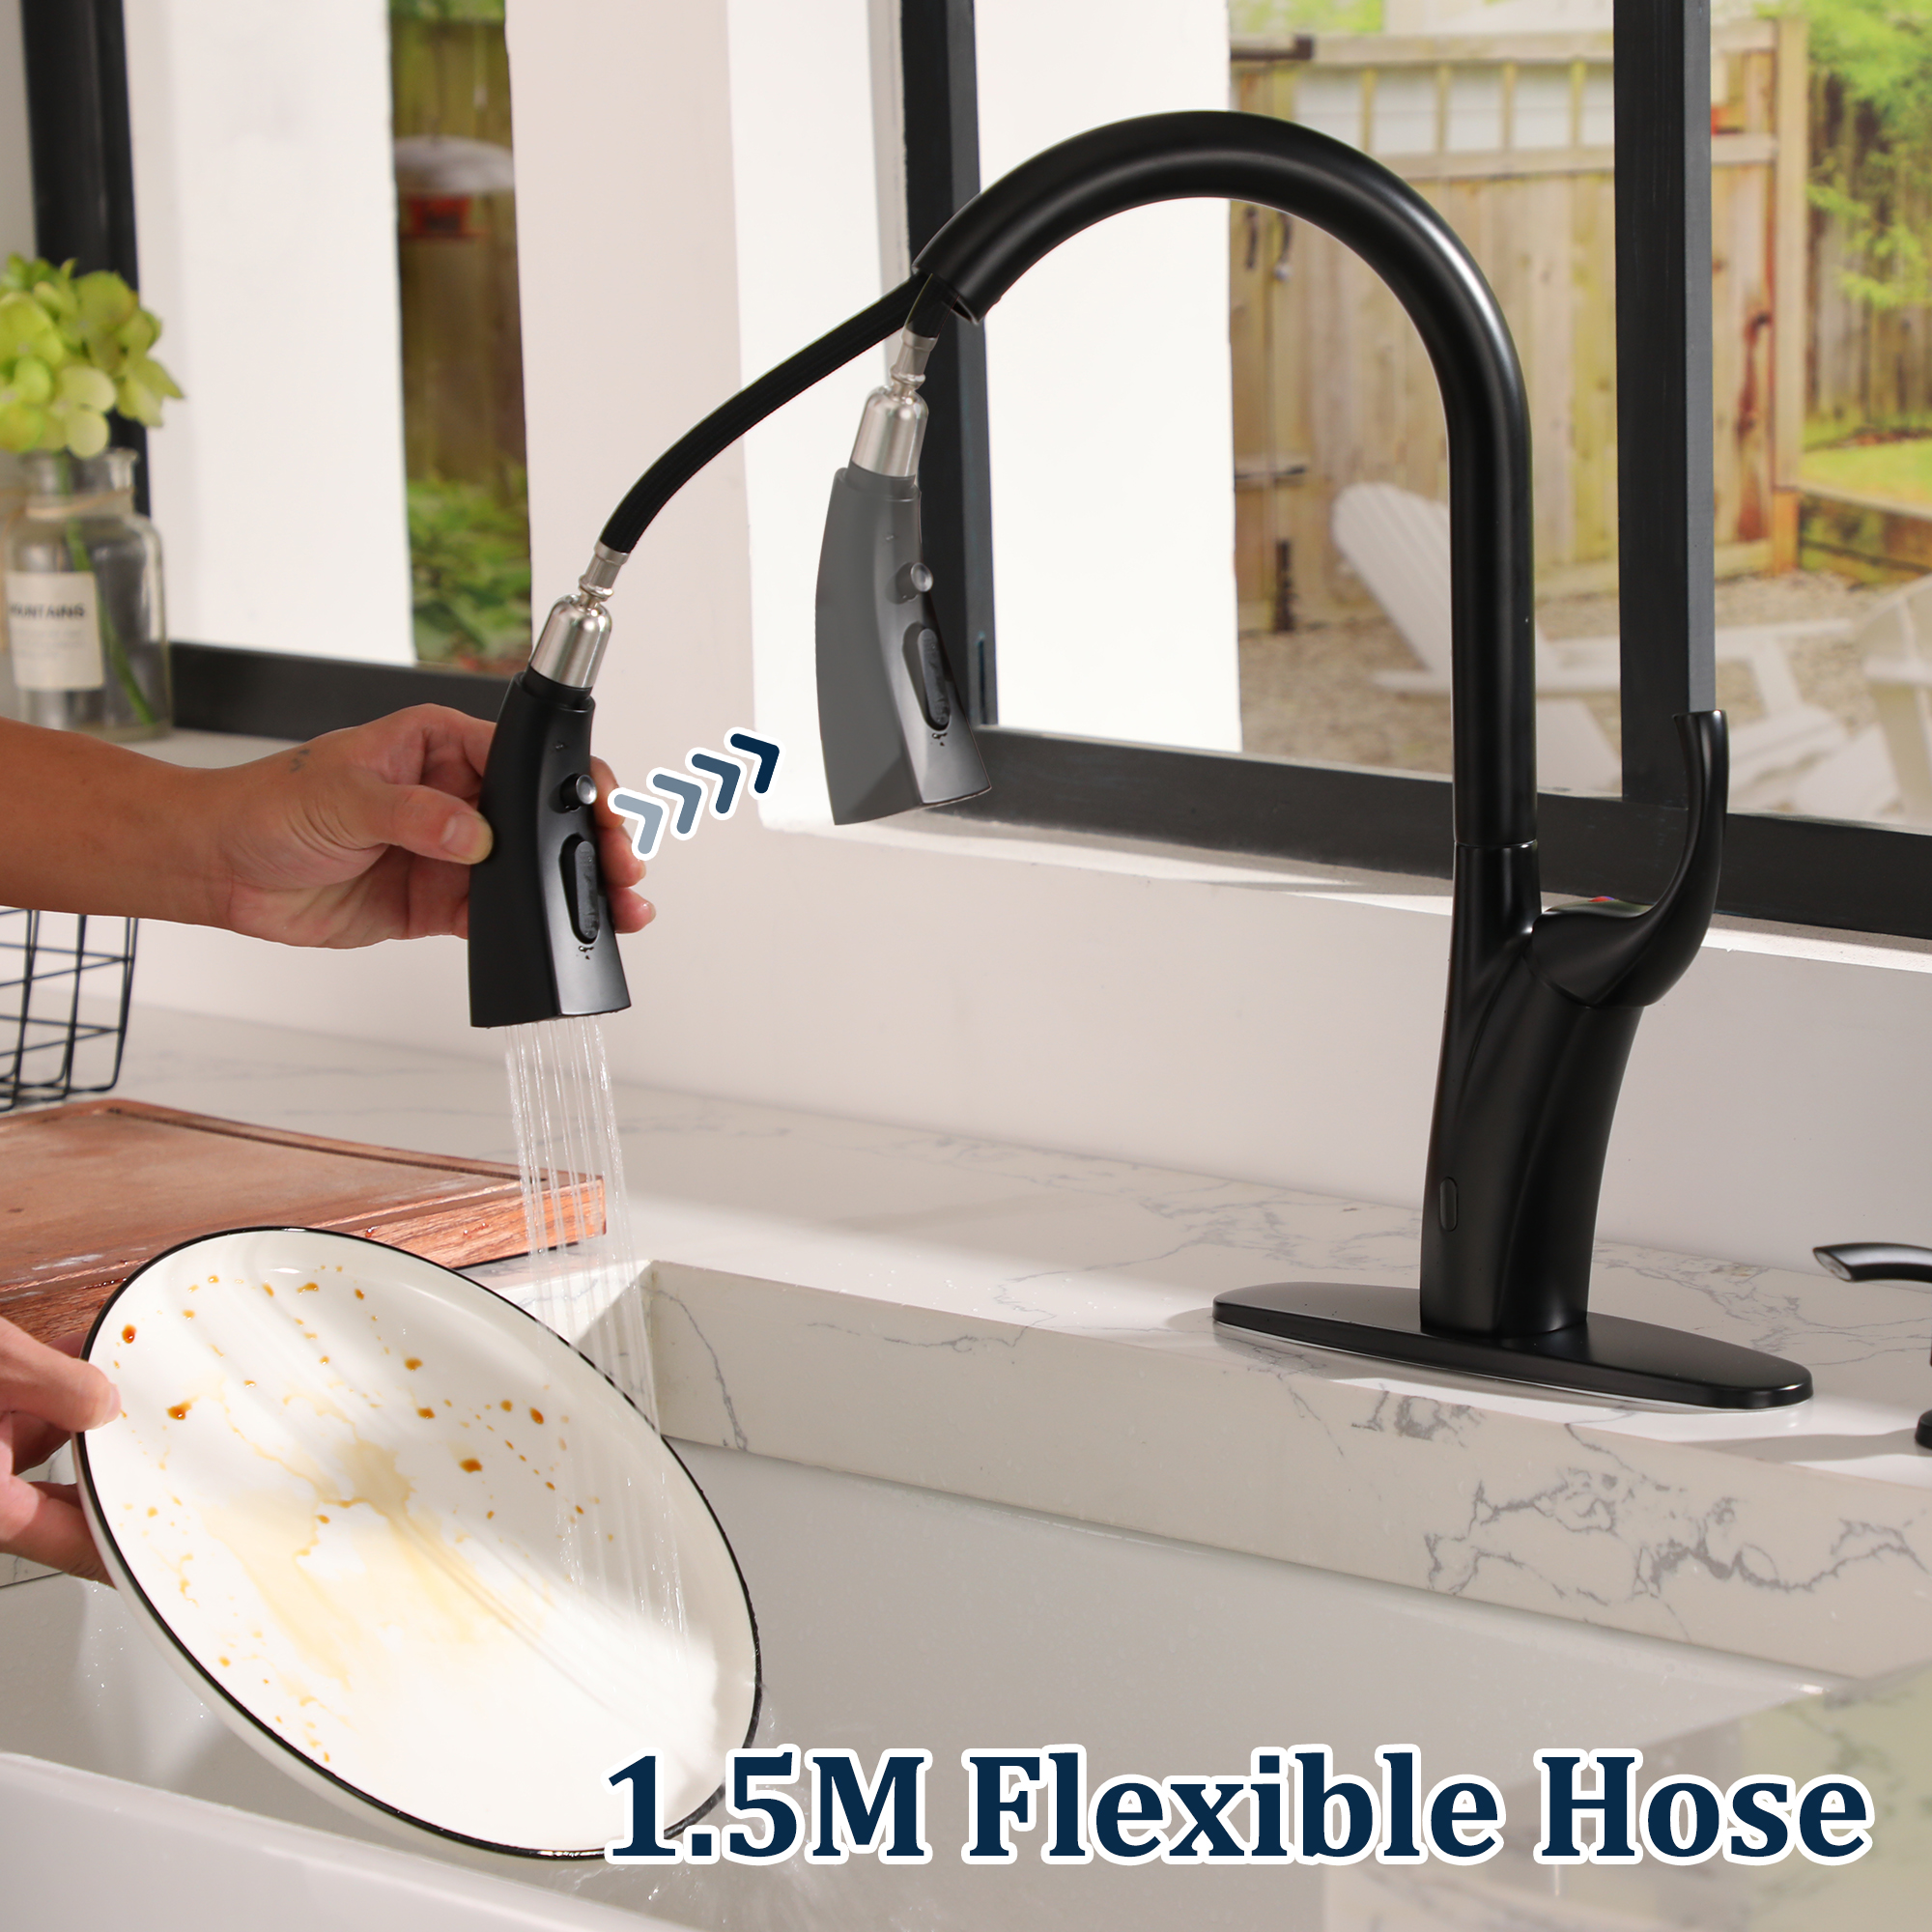 3-Spray Patterns 1.8 GPM Single Handle Touchless Pull-out Kitchen Faucet Wtih soap dispenser